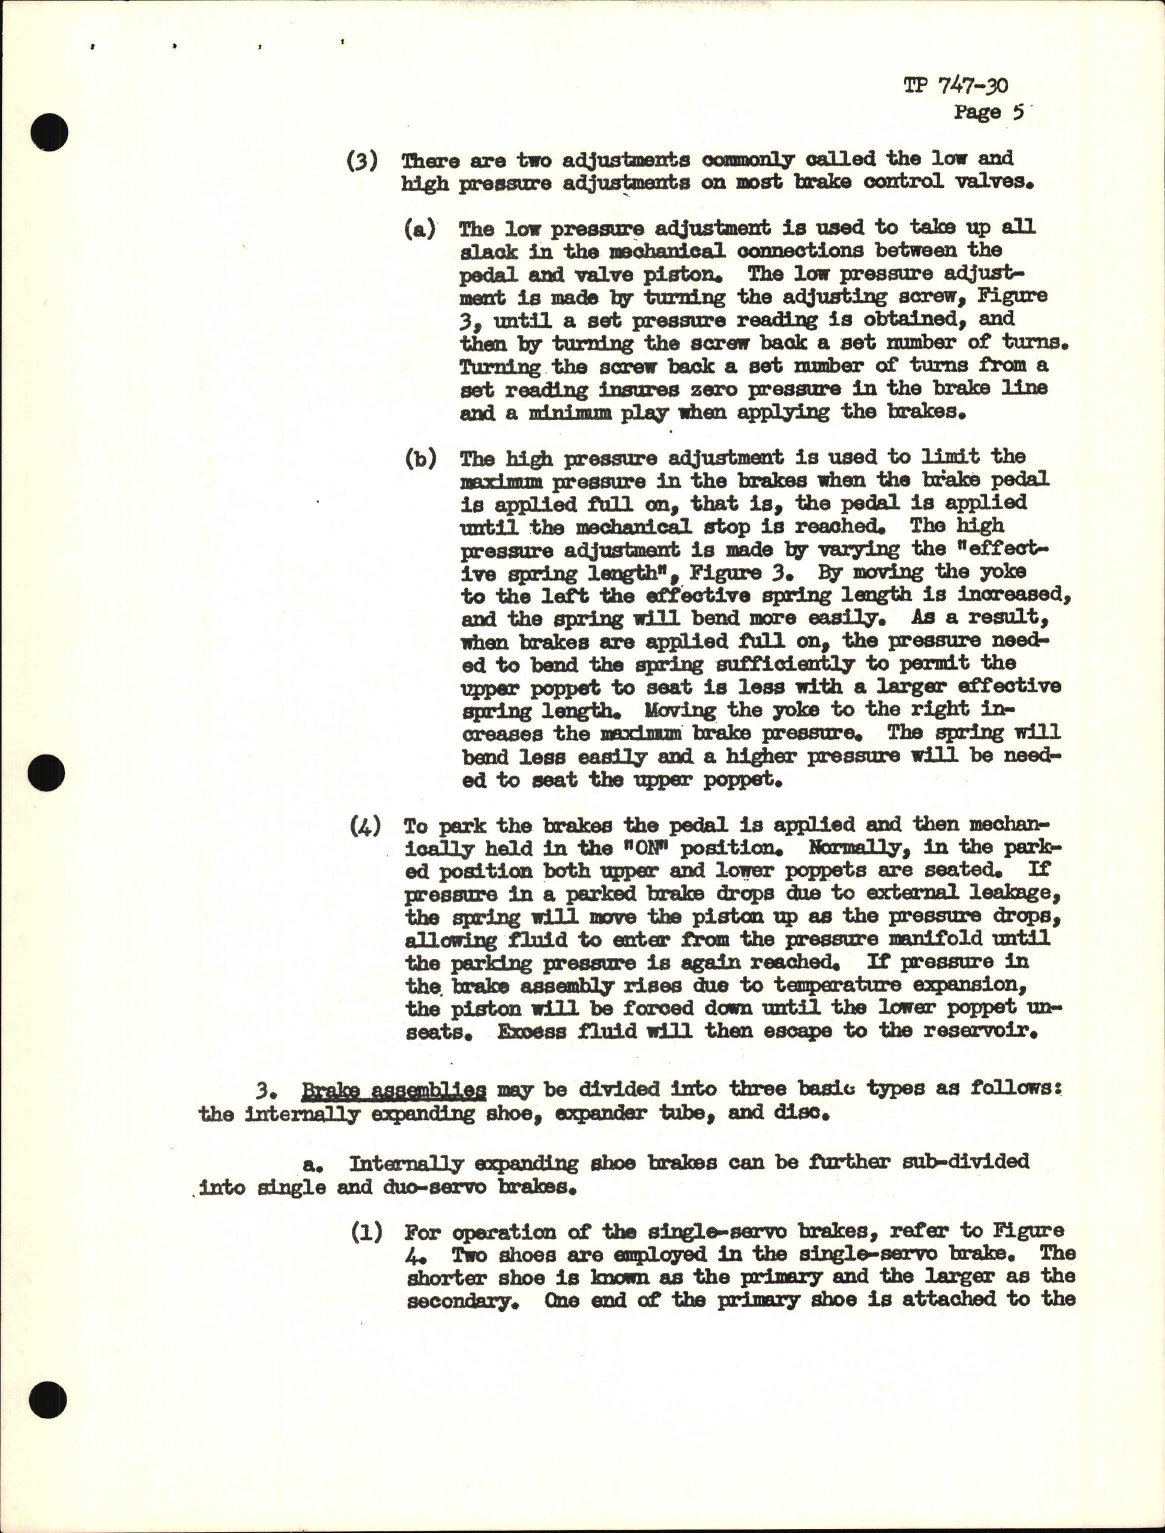 Sample page 5 from AirCorps Library document: Training Project, Hydraulic Units